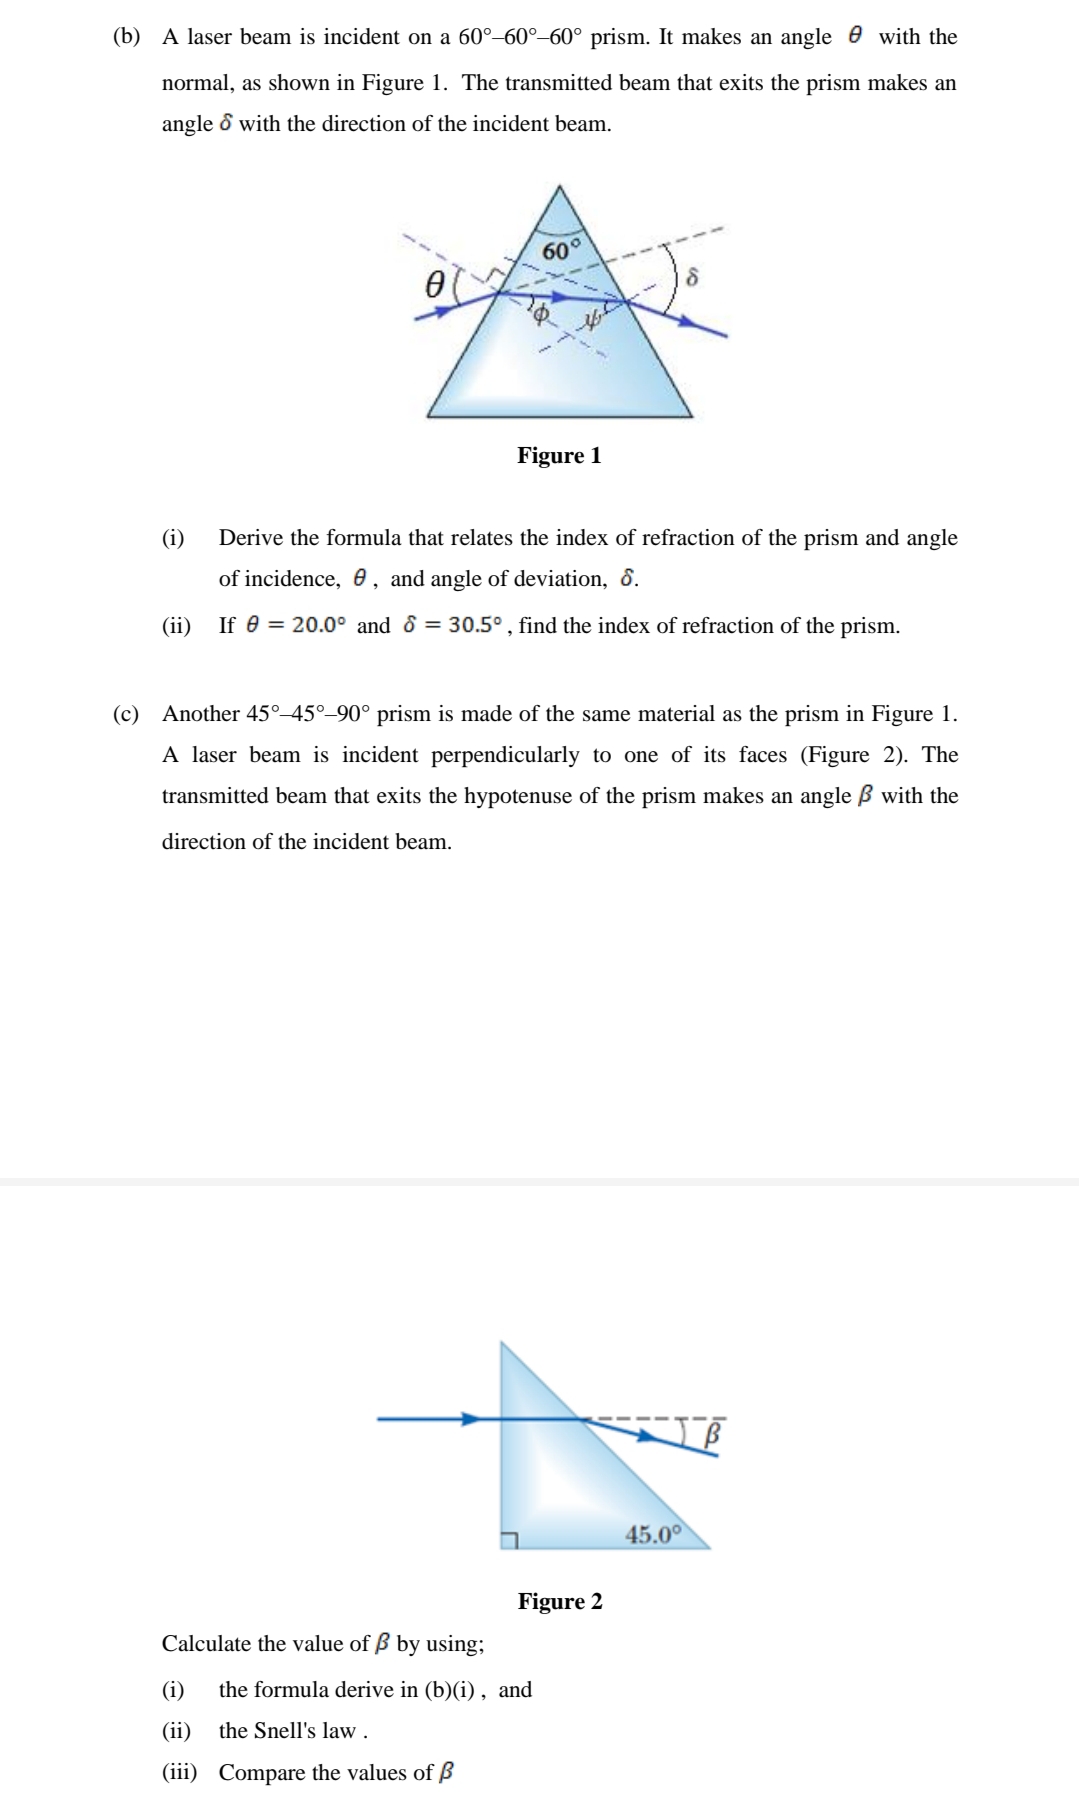 (b) A laser beam is incident on a 60°–60°–60° prism. It makes an angle e with the
normal, as shown in Figure 1. The transmitted beam that exits the prism makes an
angle & with the direction of the incident beam.
60°
Figure 1
(i)
Derive the formula that relates the index of refraction of the prism and angle
of incidence, 0, and angle of deviation, 8.
(ii)
If e = 20.0° and & = 30.5° , find the index of refraction of the prism.
(c) Another 45°–45°-90° prism is made of the same material as the prism in Figure 1.
A laser beam is incident perpendicularly to one of its faces (Figure 2). The
transmitted beam that exits the hypotenuse of the prism makes an angle ß with the
direction of the incident beam.
45.0
Figure 2
Calculate the value of B by using;
(i)
the formula derive in (b)(i) , and
(ii)
the Snell's law .
(iii) Compare the values of ß
